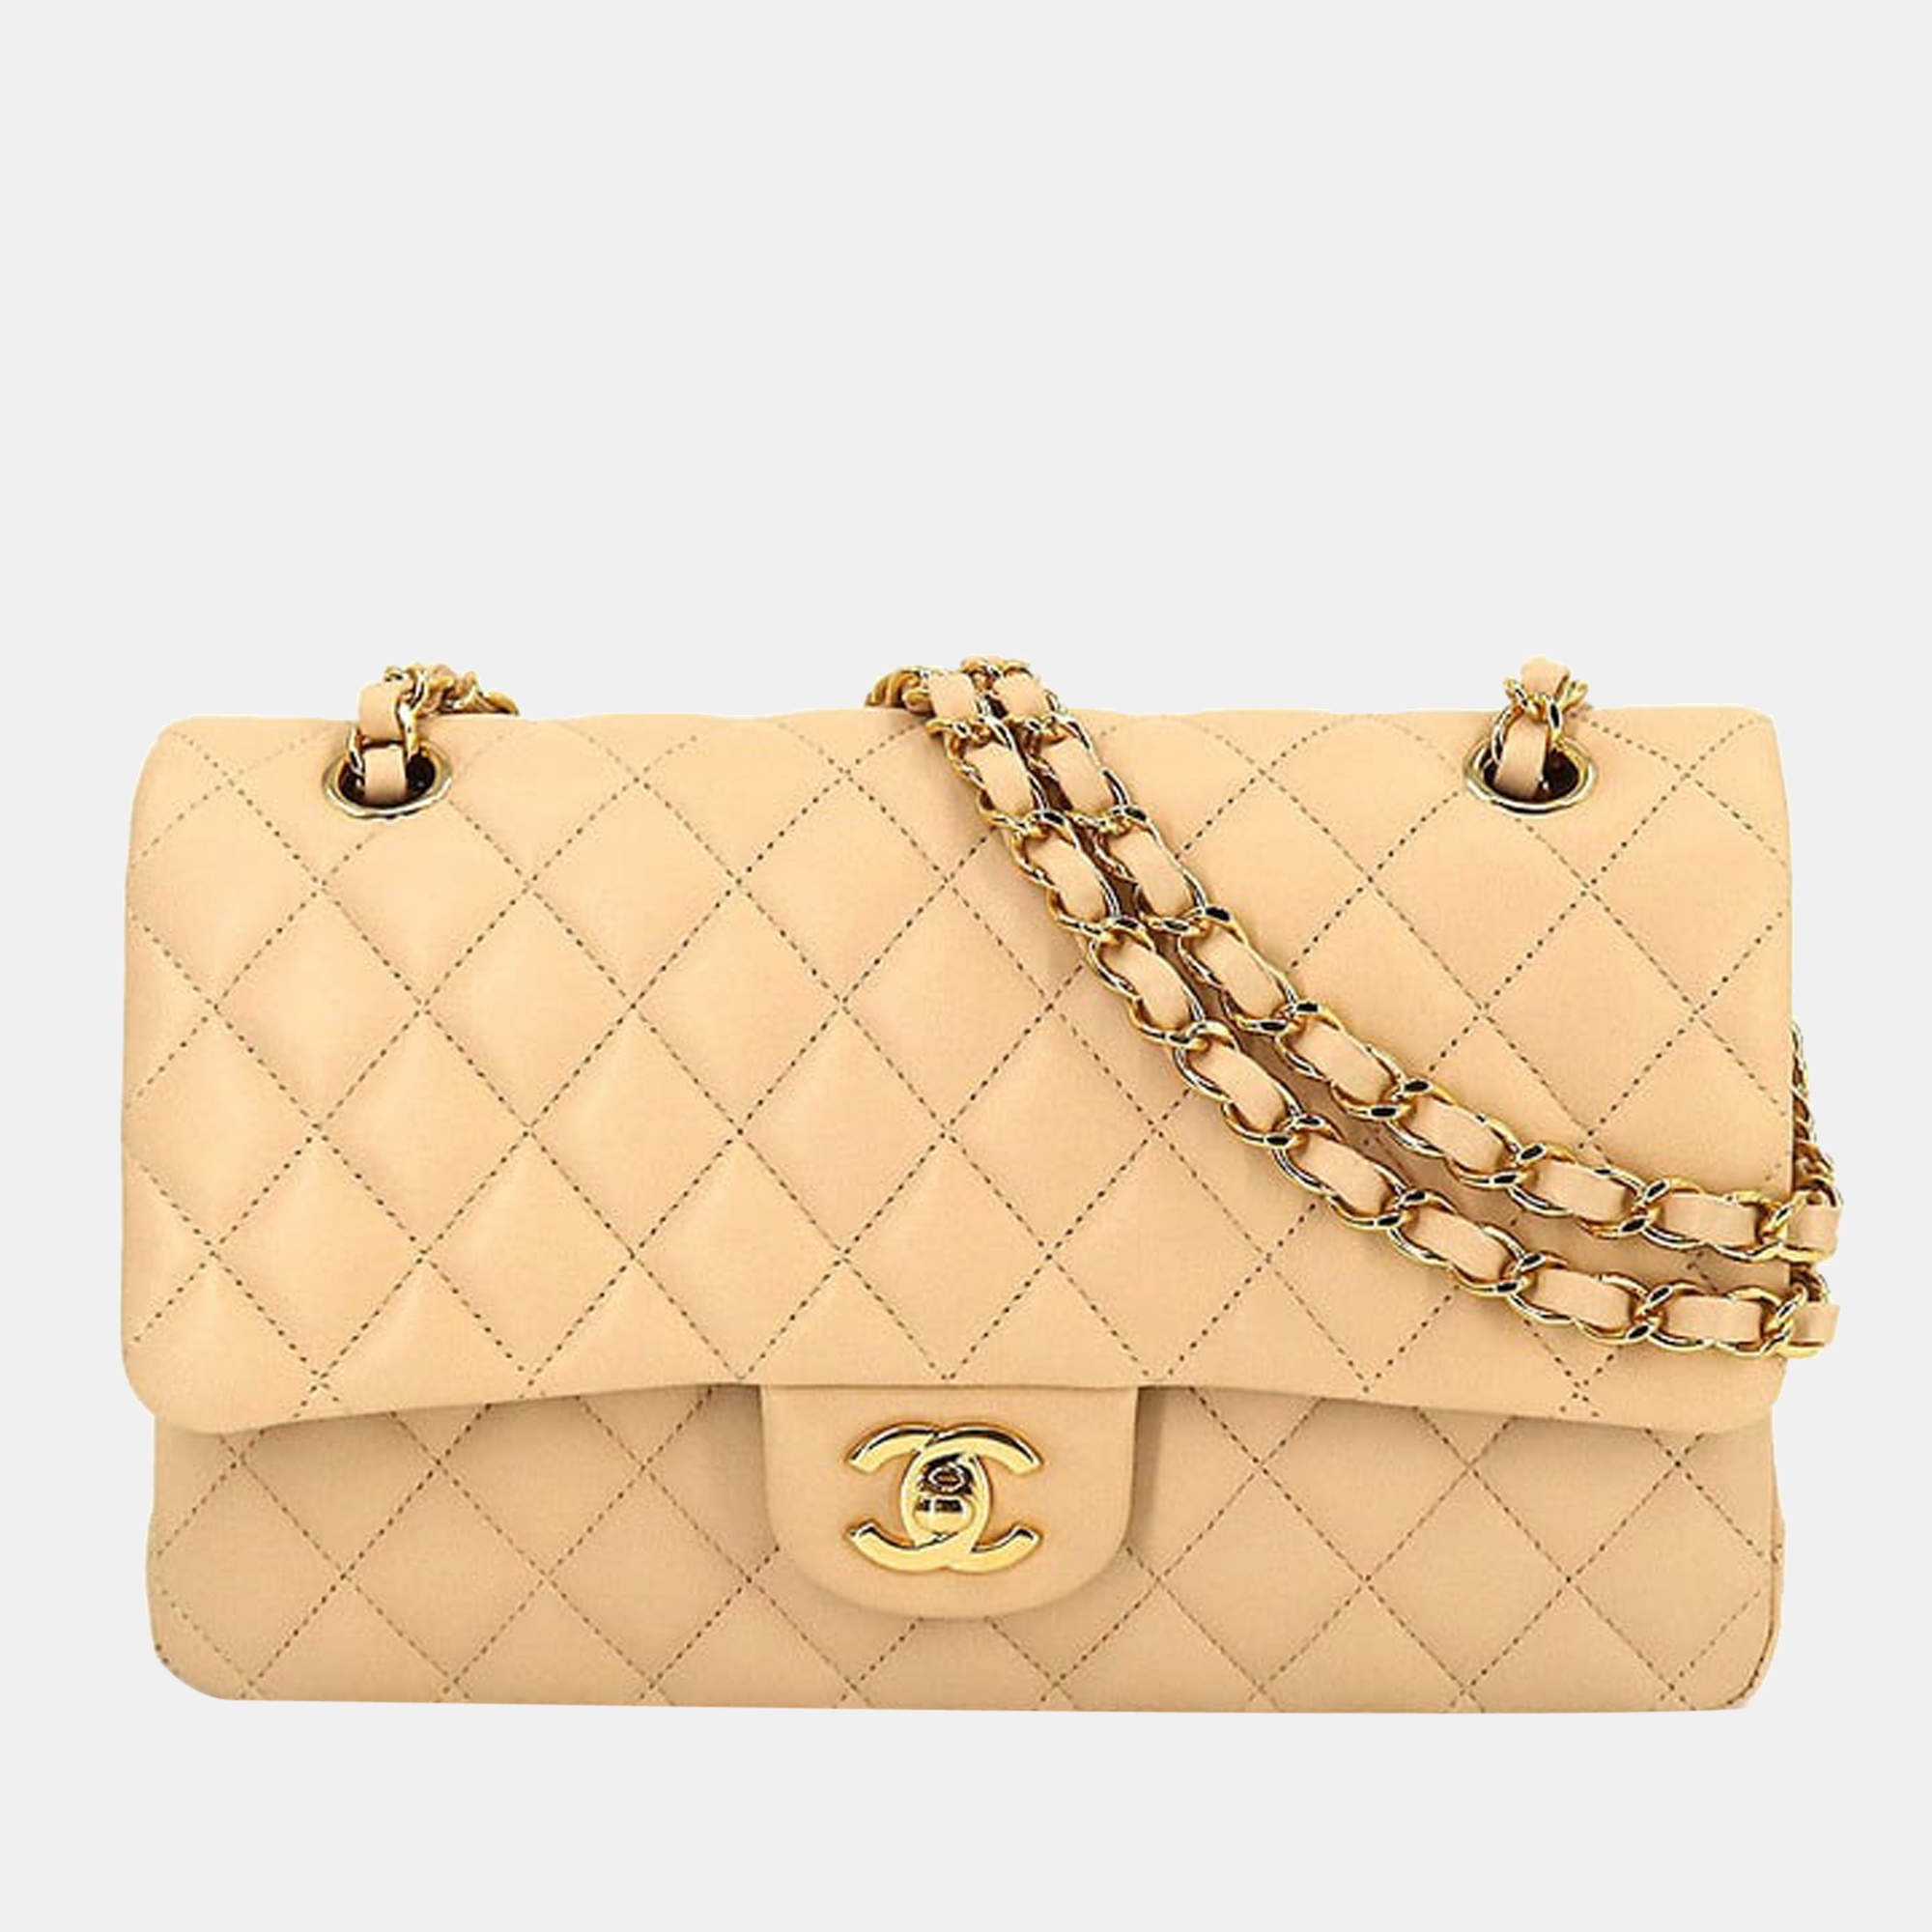 Chanel Beige Leather Small Classic Double Flap Shoulder Bag